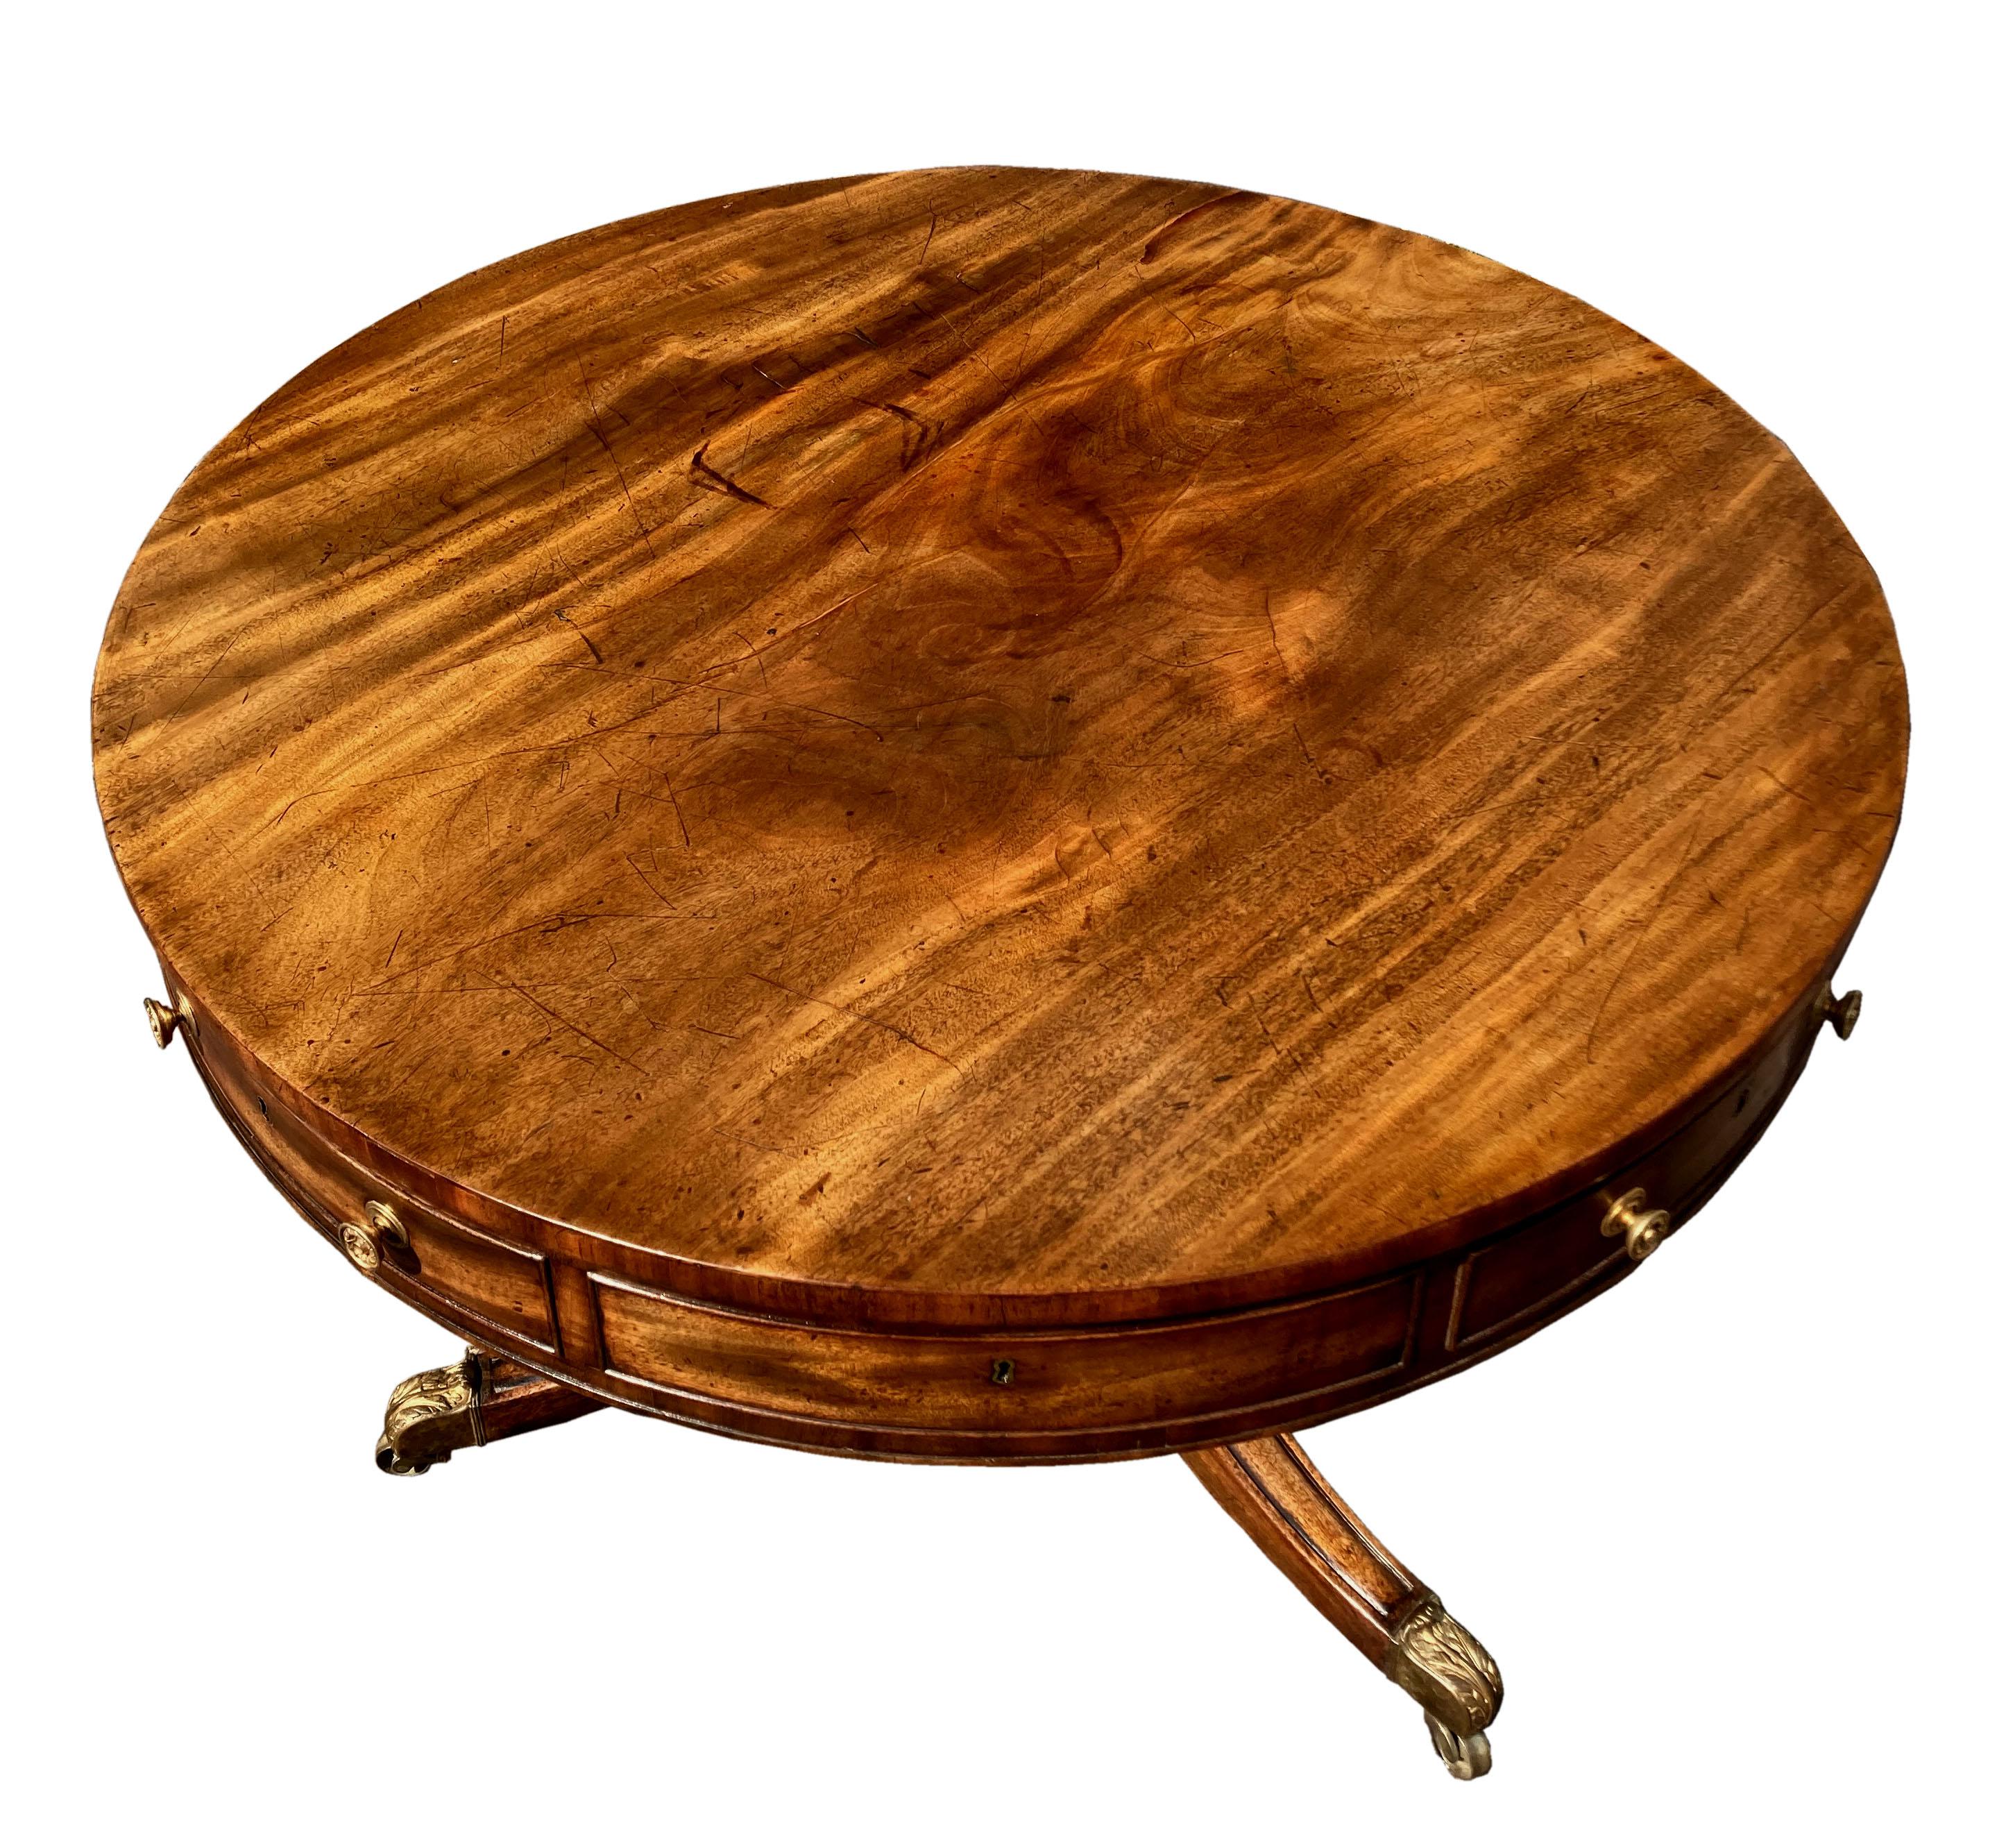 A Regency mahogany drum table of a good original colour and condition. Attractive model with veneered top, cross-banding to the edge of the top and carcase fronts and 3 splay sabre leg base with castors finely cast with acanthus leaves and still